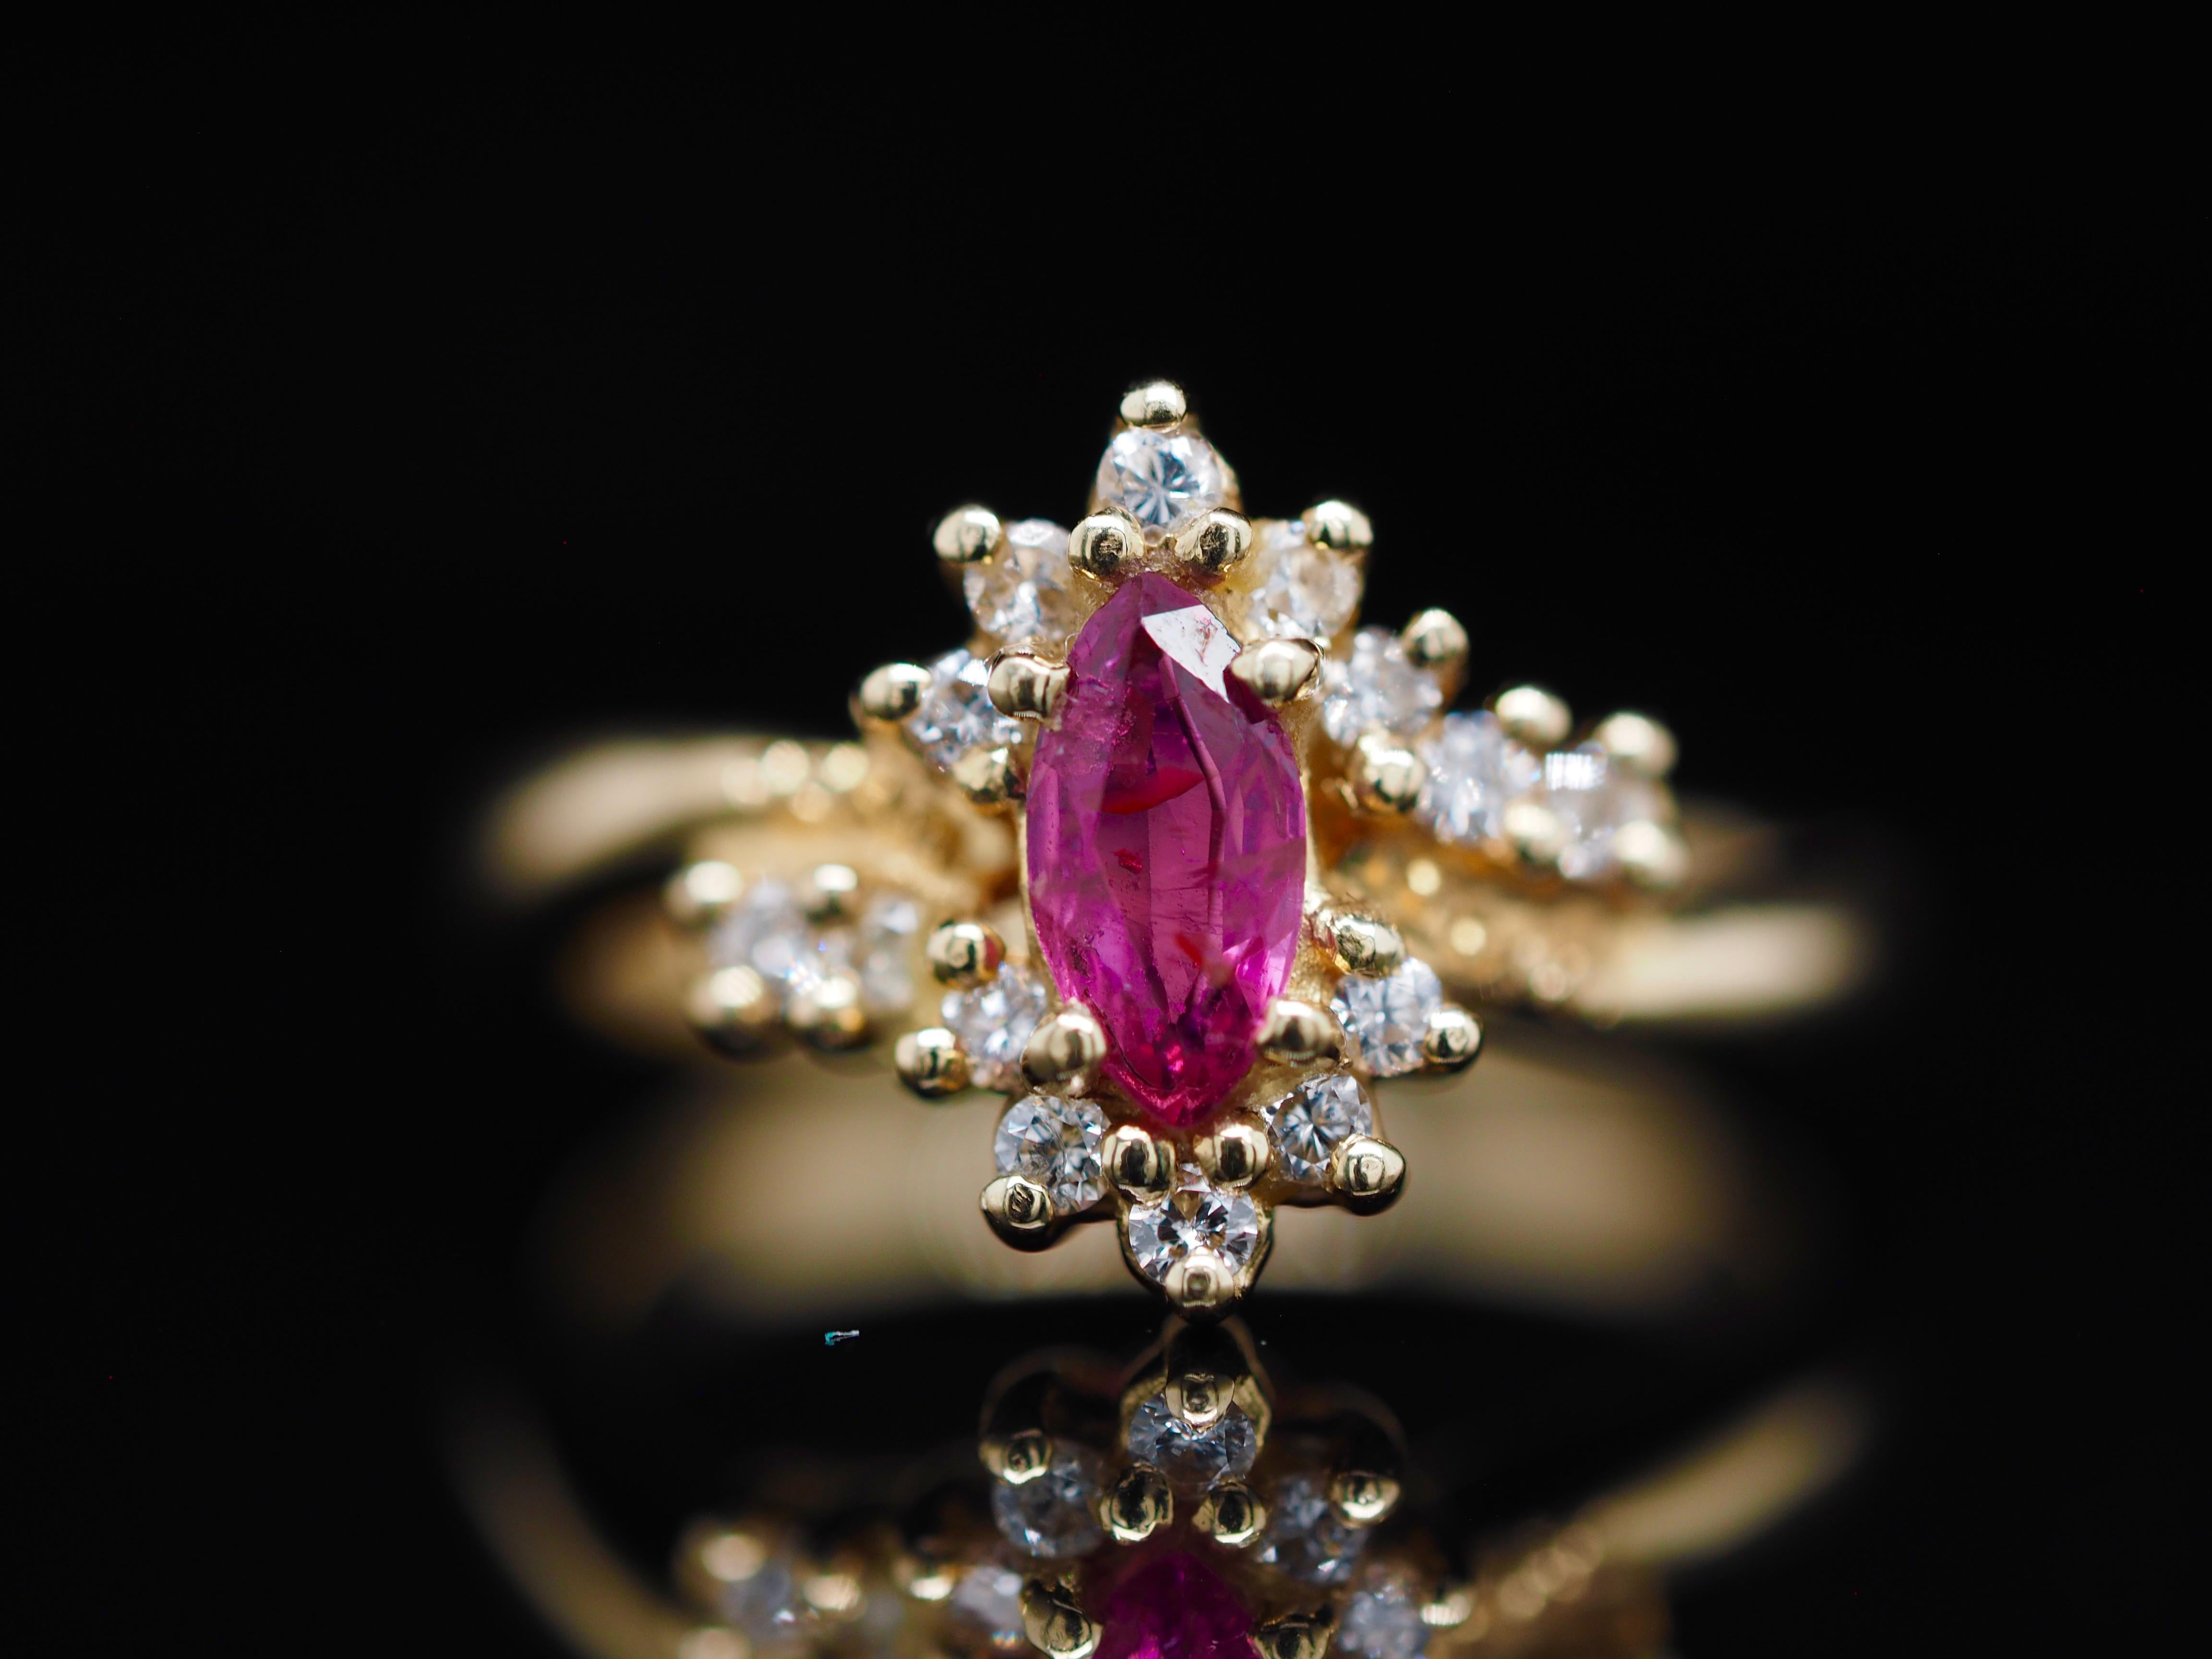 A retro ring is always the perfect accessory. This bright pink marquise sapphire is accented with a starburst of brilliant round diamonds. It is such a precious ring you can layer or wear on its own bringing so much life!
It can be sized up or